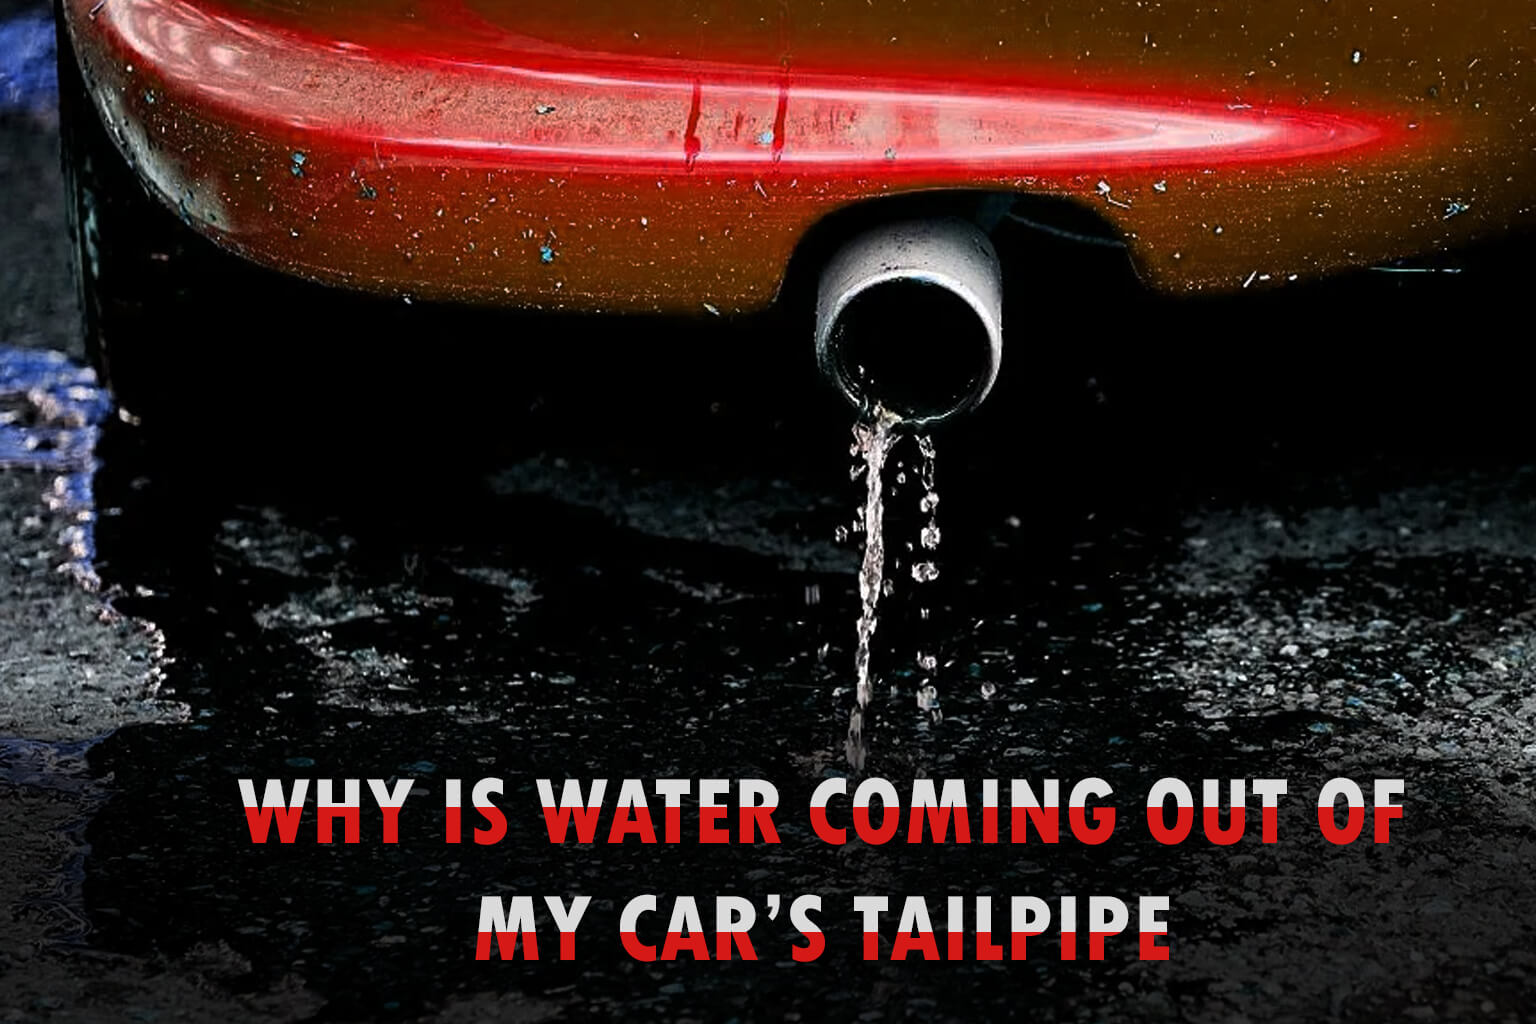 Why Is Water Coming Out Of My Car’s Tailpipe?